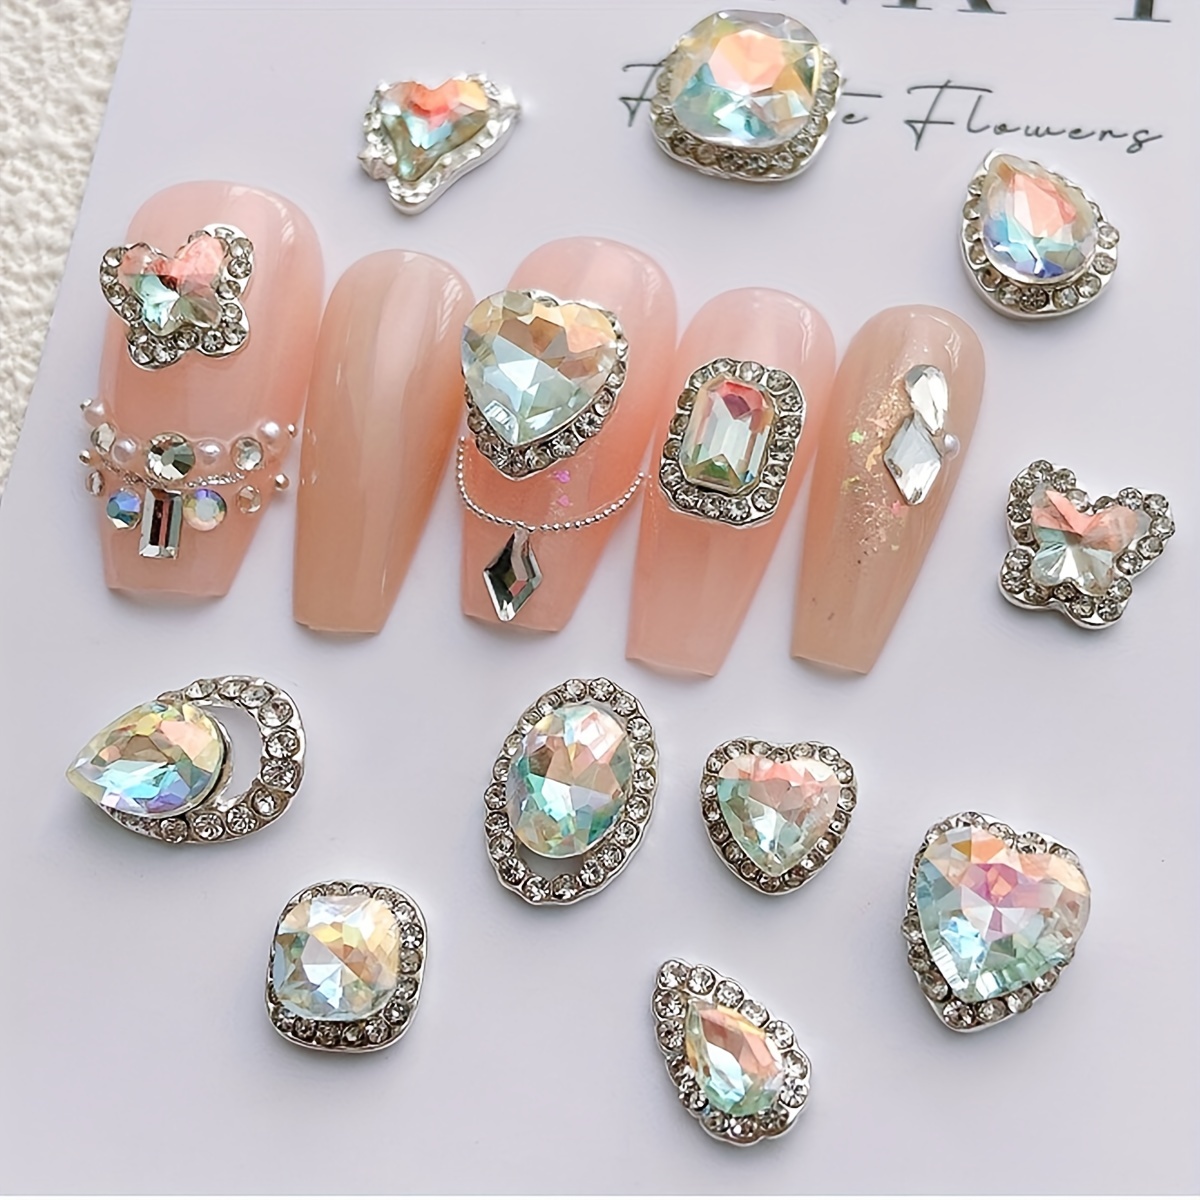 

24pcs, 3d Alloy Nail Art Charms With Crystal Ab Rhinestone, Alloy Nail Gemstone Jewelry For Nail Decoration, Cute Shiny Nail Jewelry Accessories Acrylic Nails For Nail Art Diy Decoration Use